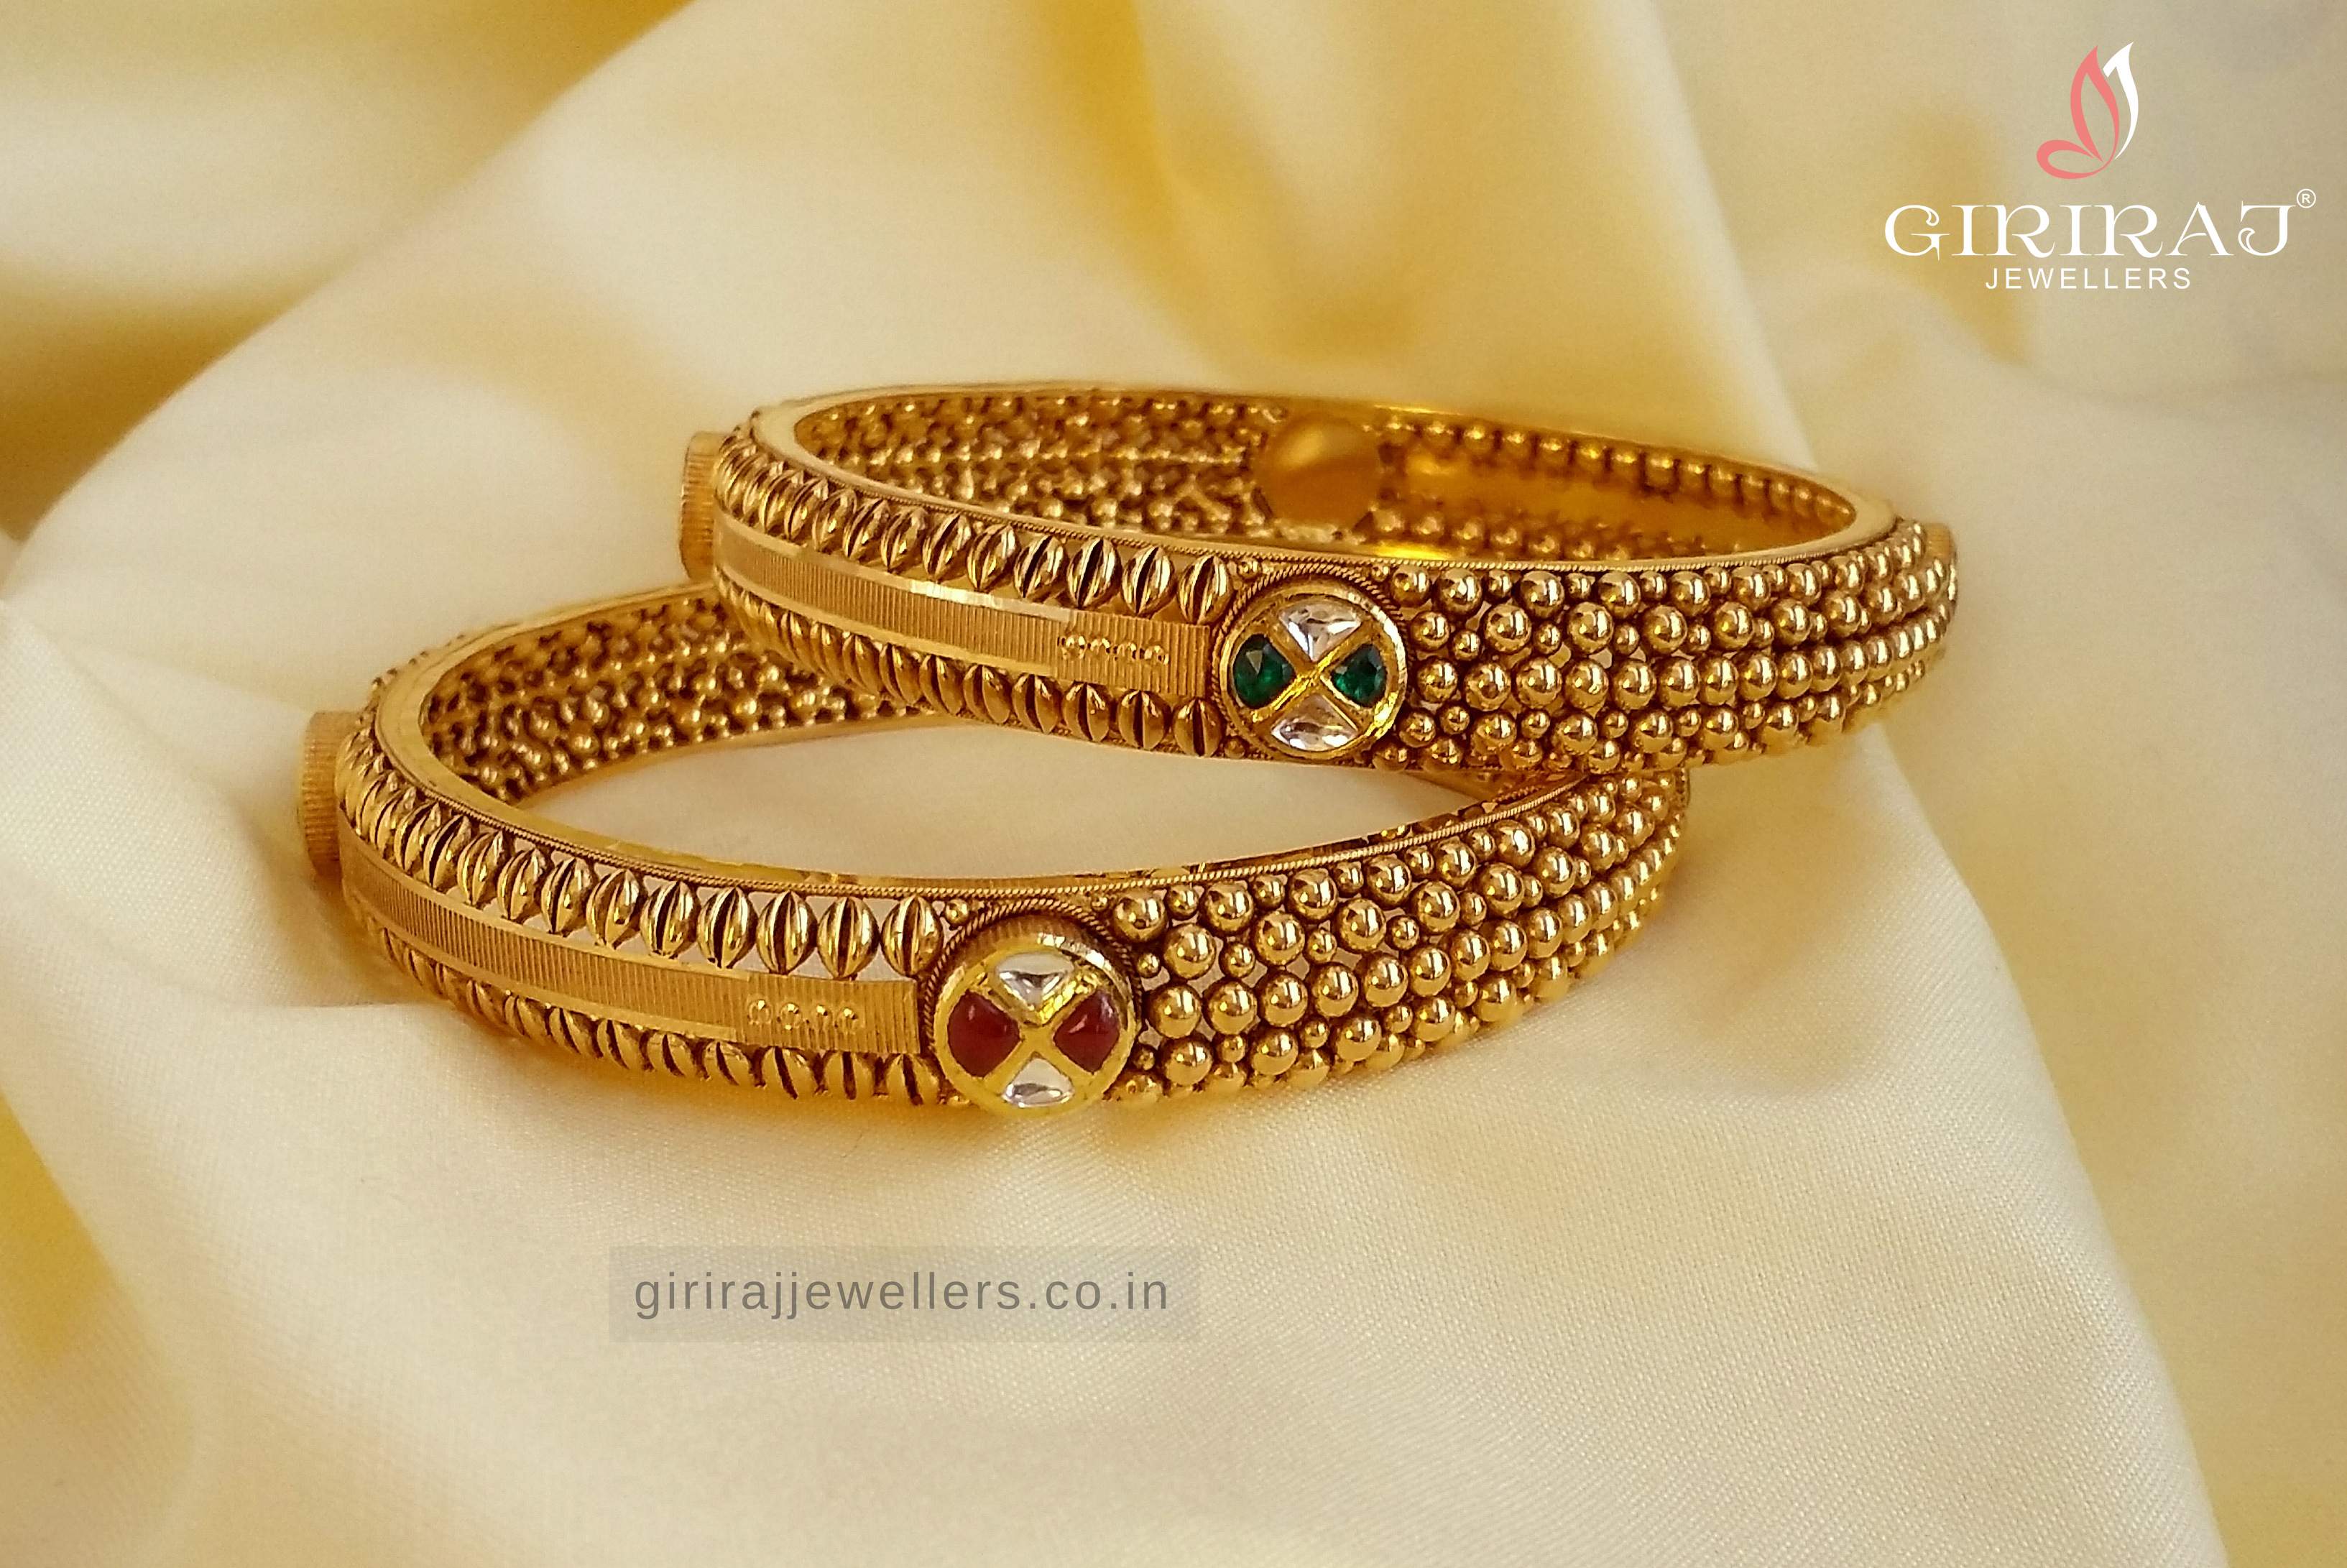 Buy Bling & Beads Gold Bangles 22 KT yellow gold (42.3 gm). At Best Price In India. Check Bangles & Bracelets New Designs At Giriraj Jewellers. BIS Care, Hallmark, 100% Certified | Trust & Quality of Giriraj Jewellers India | 24k gold bangles online | gold bangles for women new design | bracelet designs for wedding | buy gold diamond bangles | new gold bangles design | gold bracelet for mens with price | latest designs of gold bangles and kadas | trendy gold bangle for daily wear | gold bangles new design | gold kangan designs with price